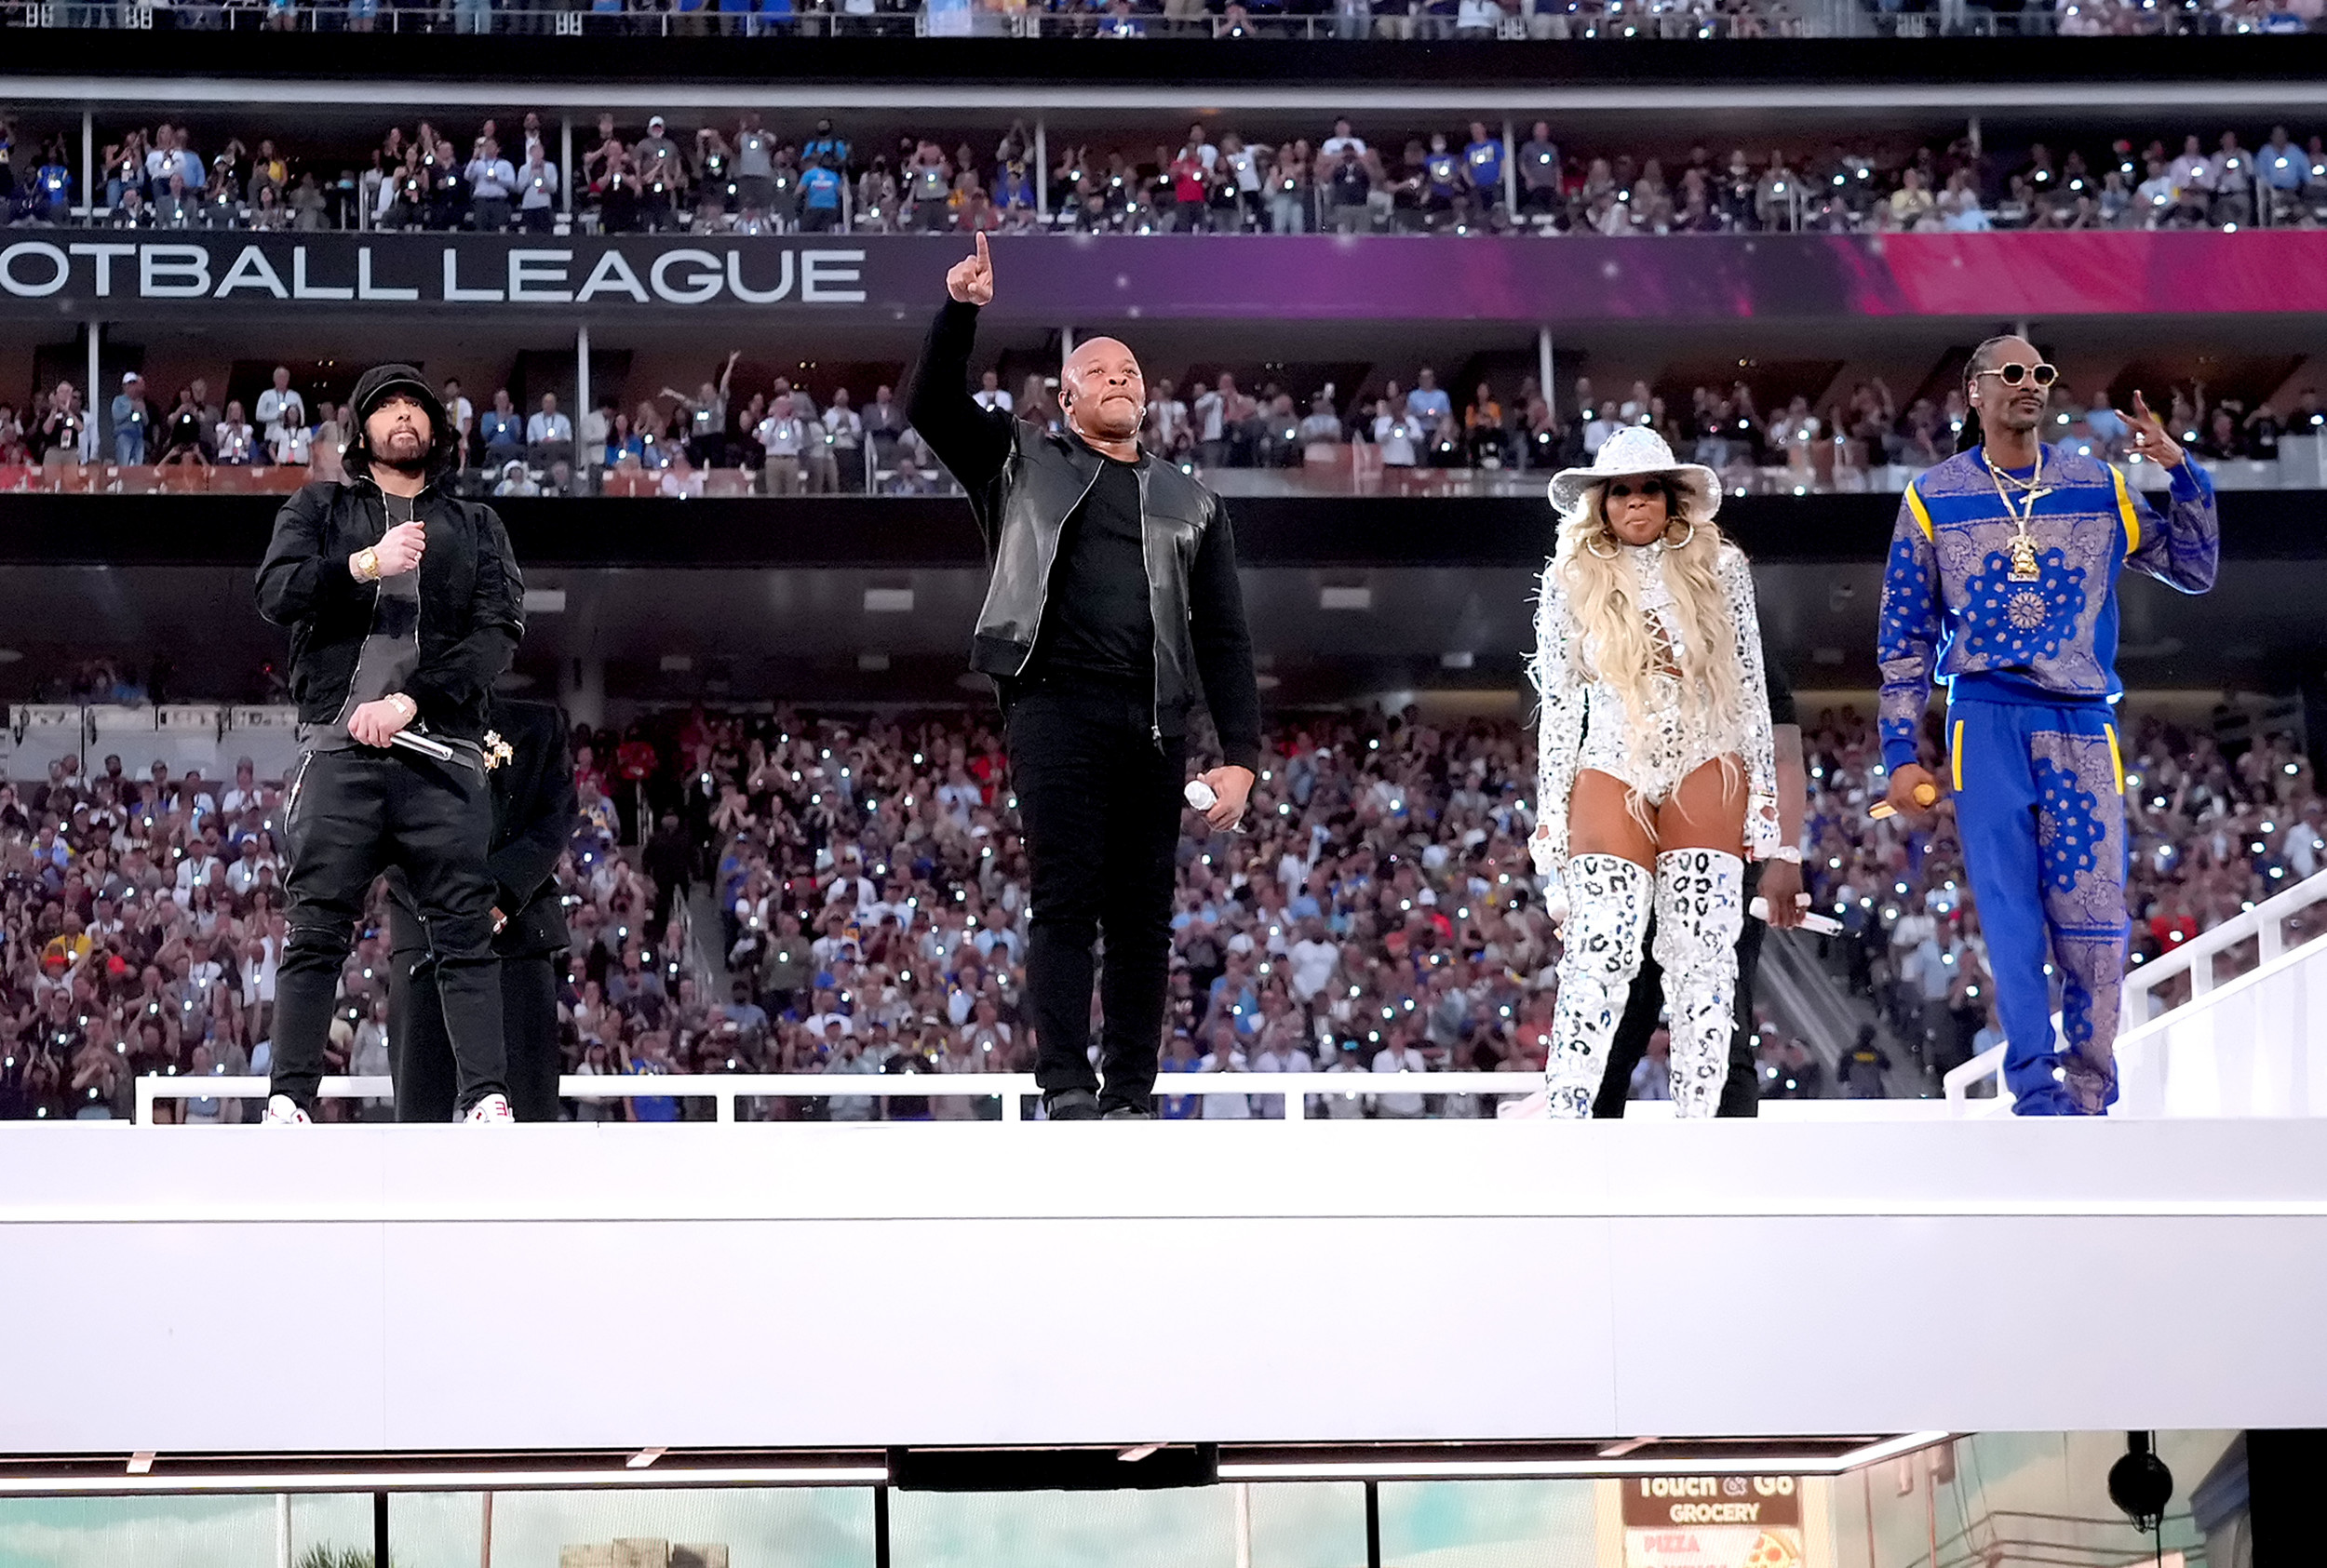 The 5 best meme reactions to the Super Bowl Halftime Show.